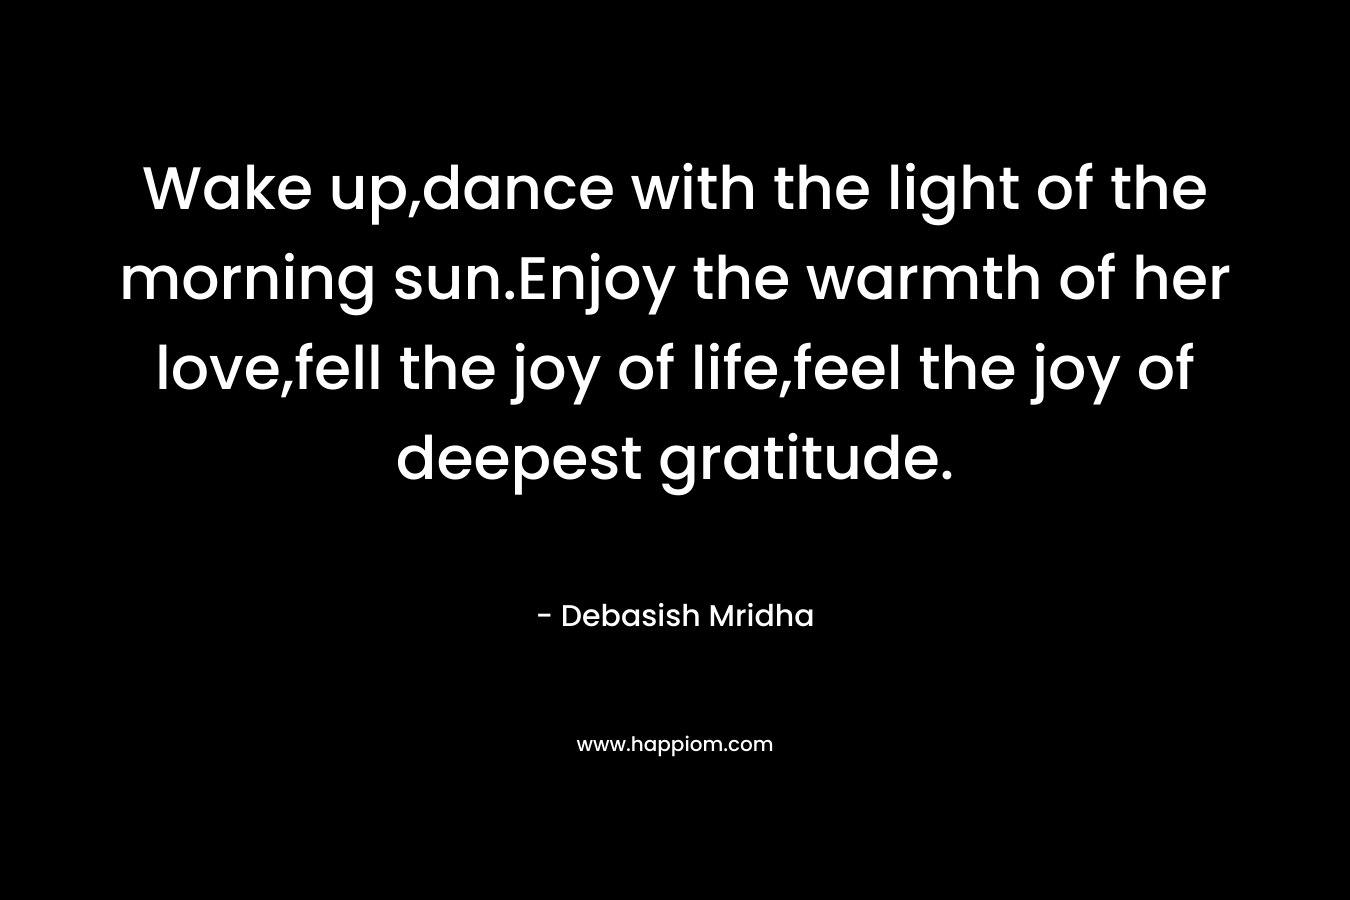 Wake up,dance with the light of the morning sun.Enjoy the warmth of her love,fell the joy of life,feel the joy of deepest gratitude. – Debasish Mridha